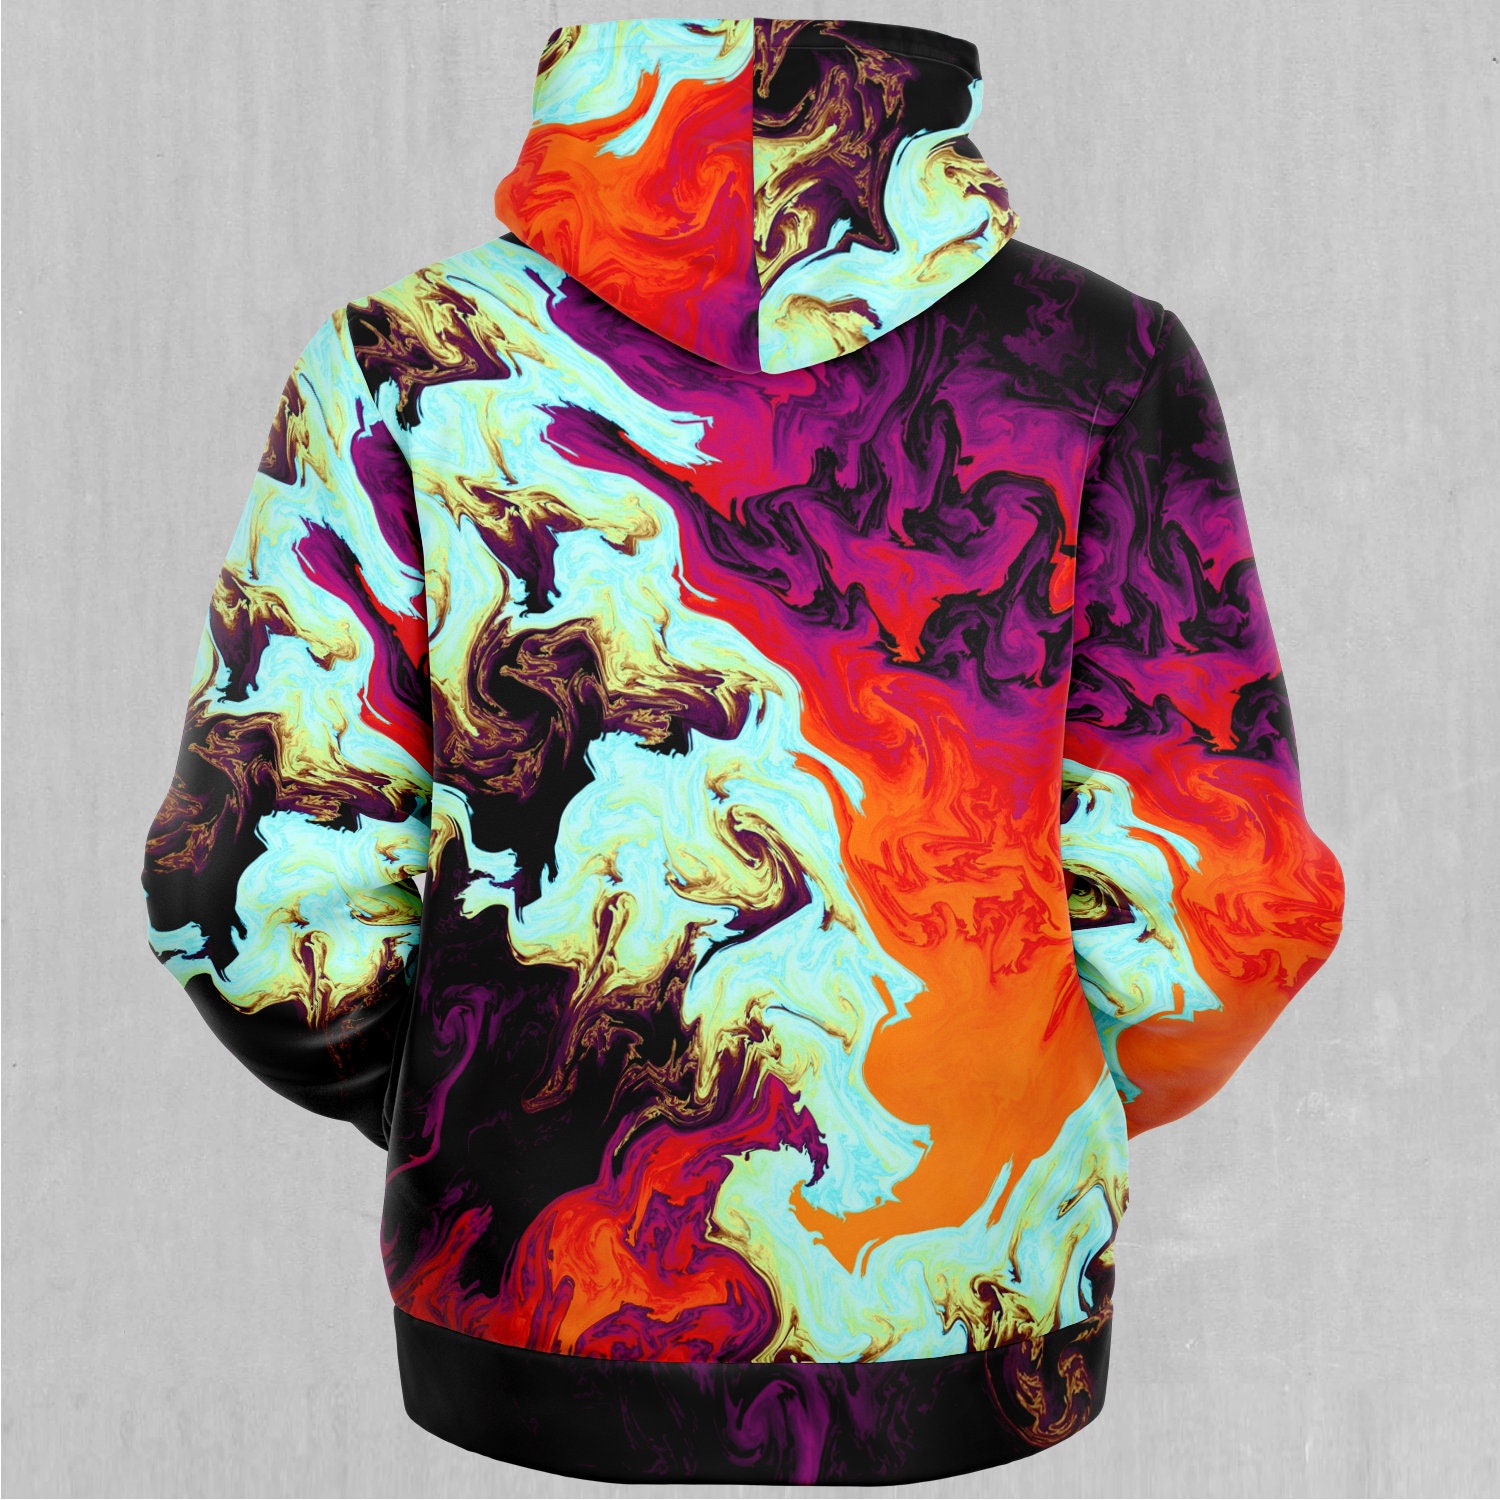 Discover Lava Bath Psychedelic Abstract Sherpa Microfleece Zip-Up Hoodie